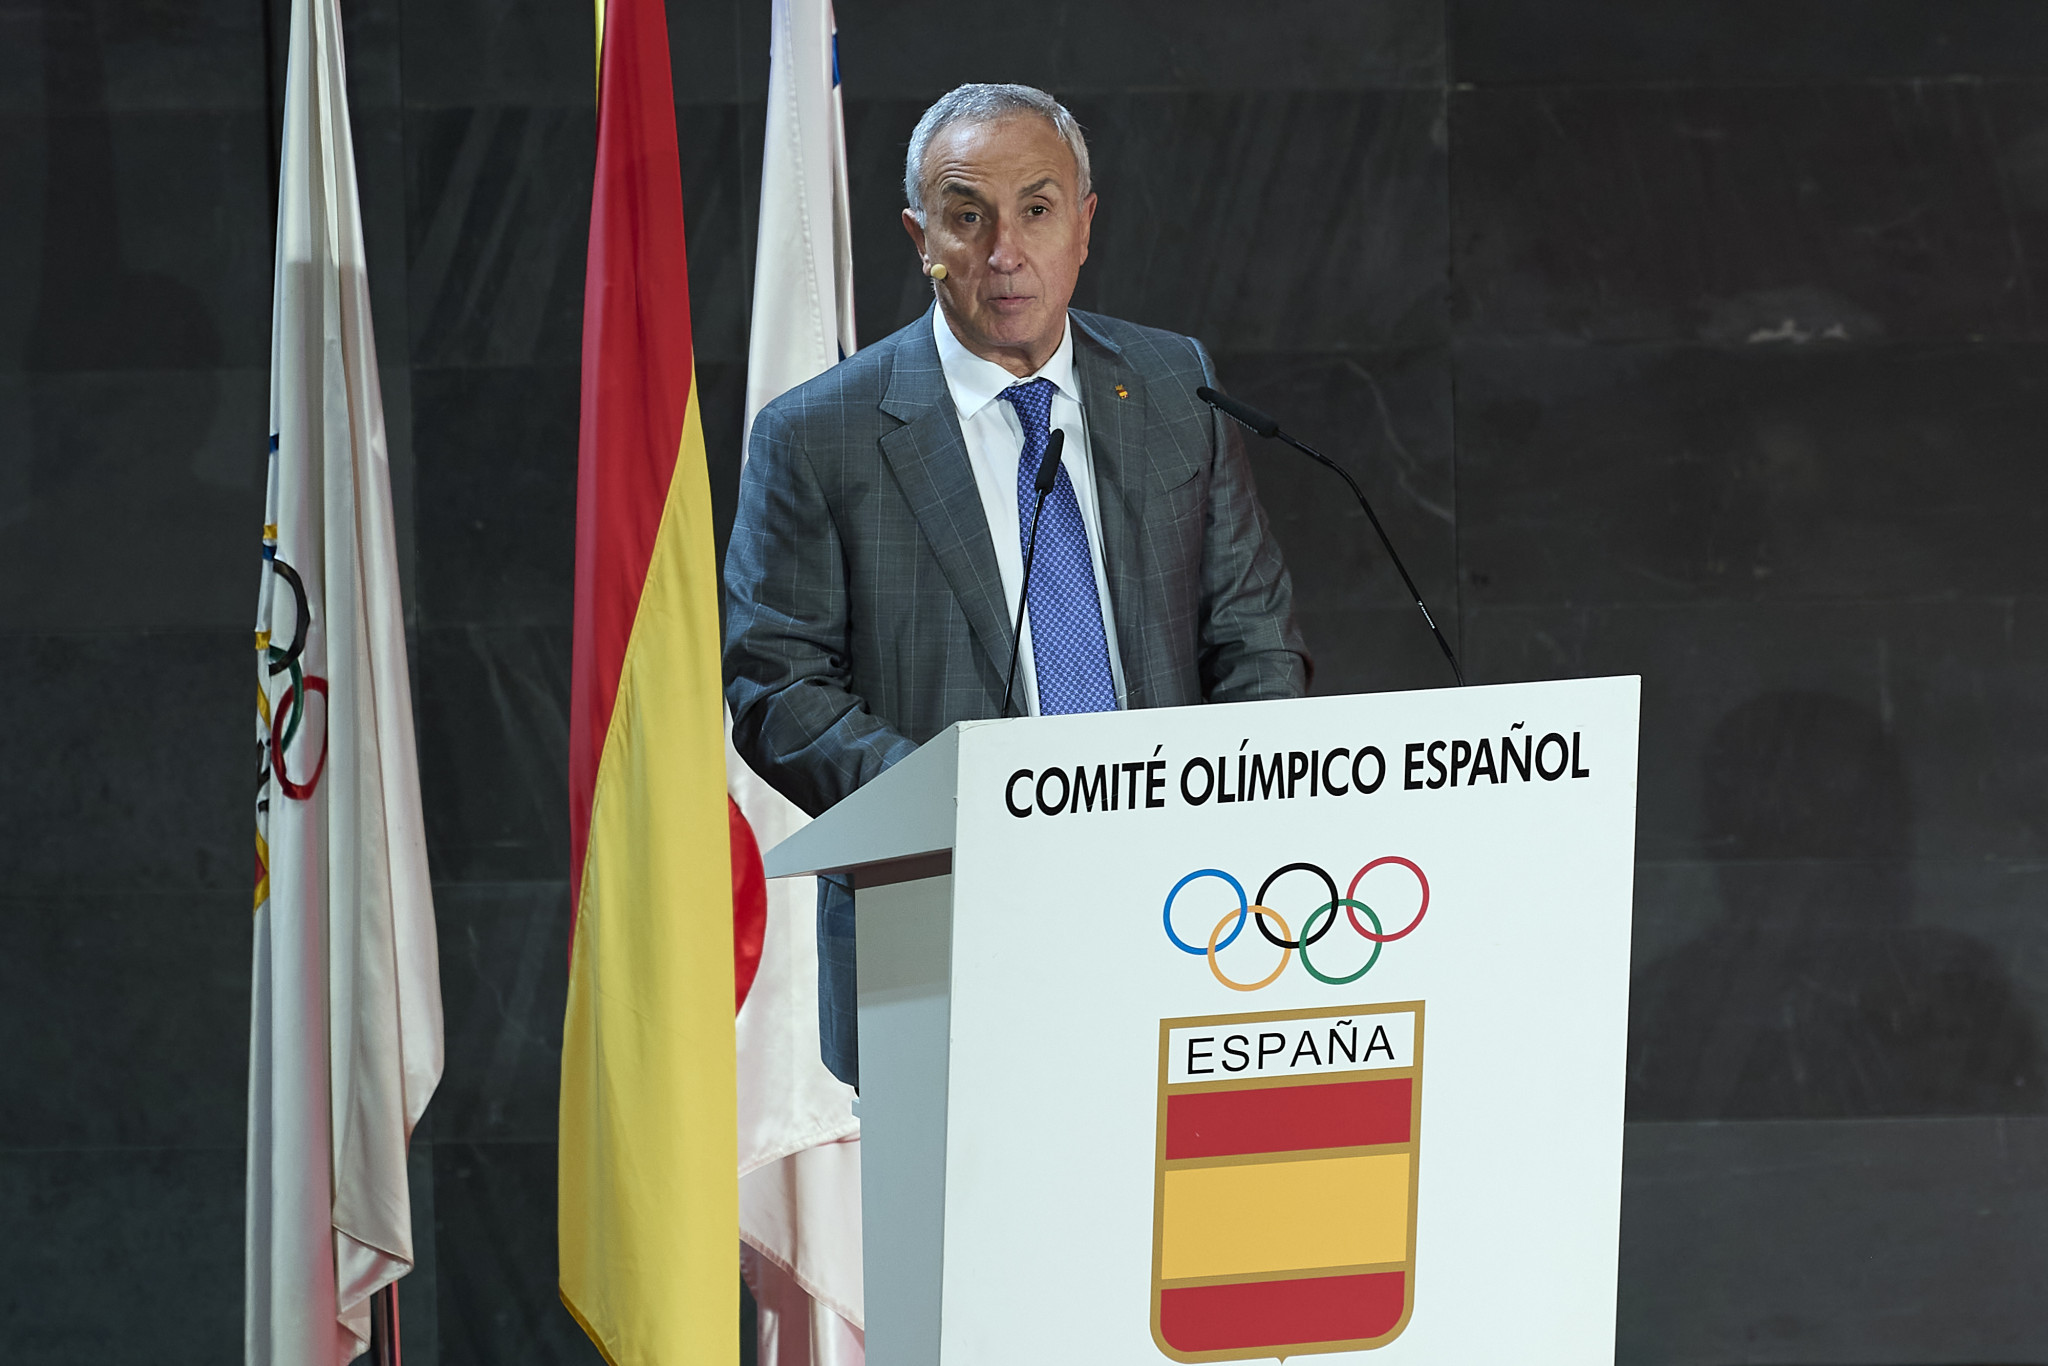 Spanish Olympic Committee President Alejandro Blanco has ruled out the possibility of Madrid bidding to host the 2036 Olympic and Paralympic Games ©Getty Images